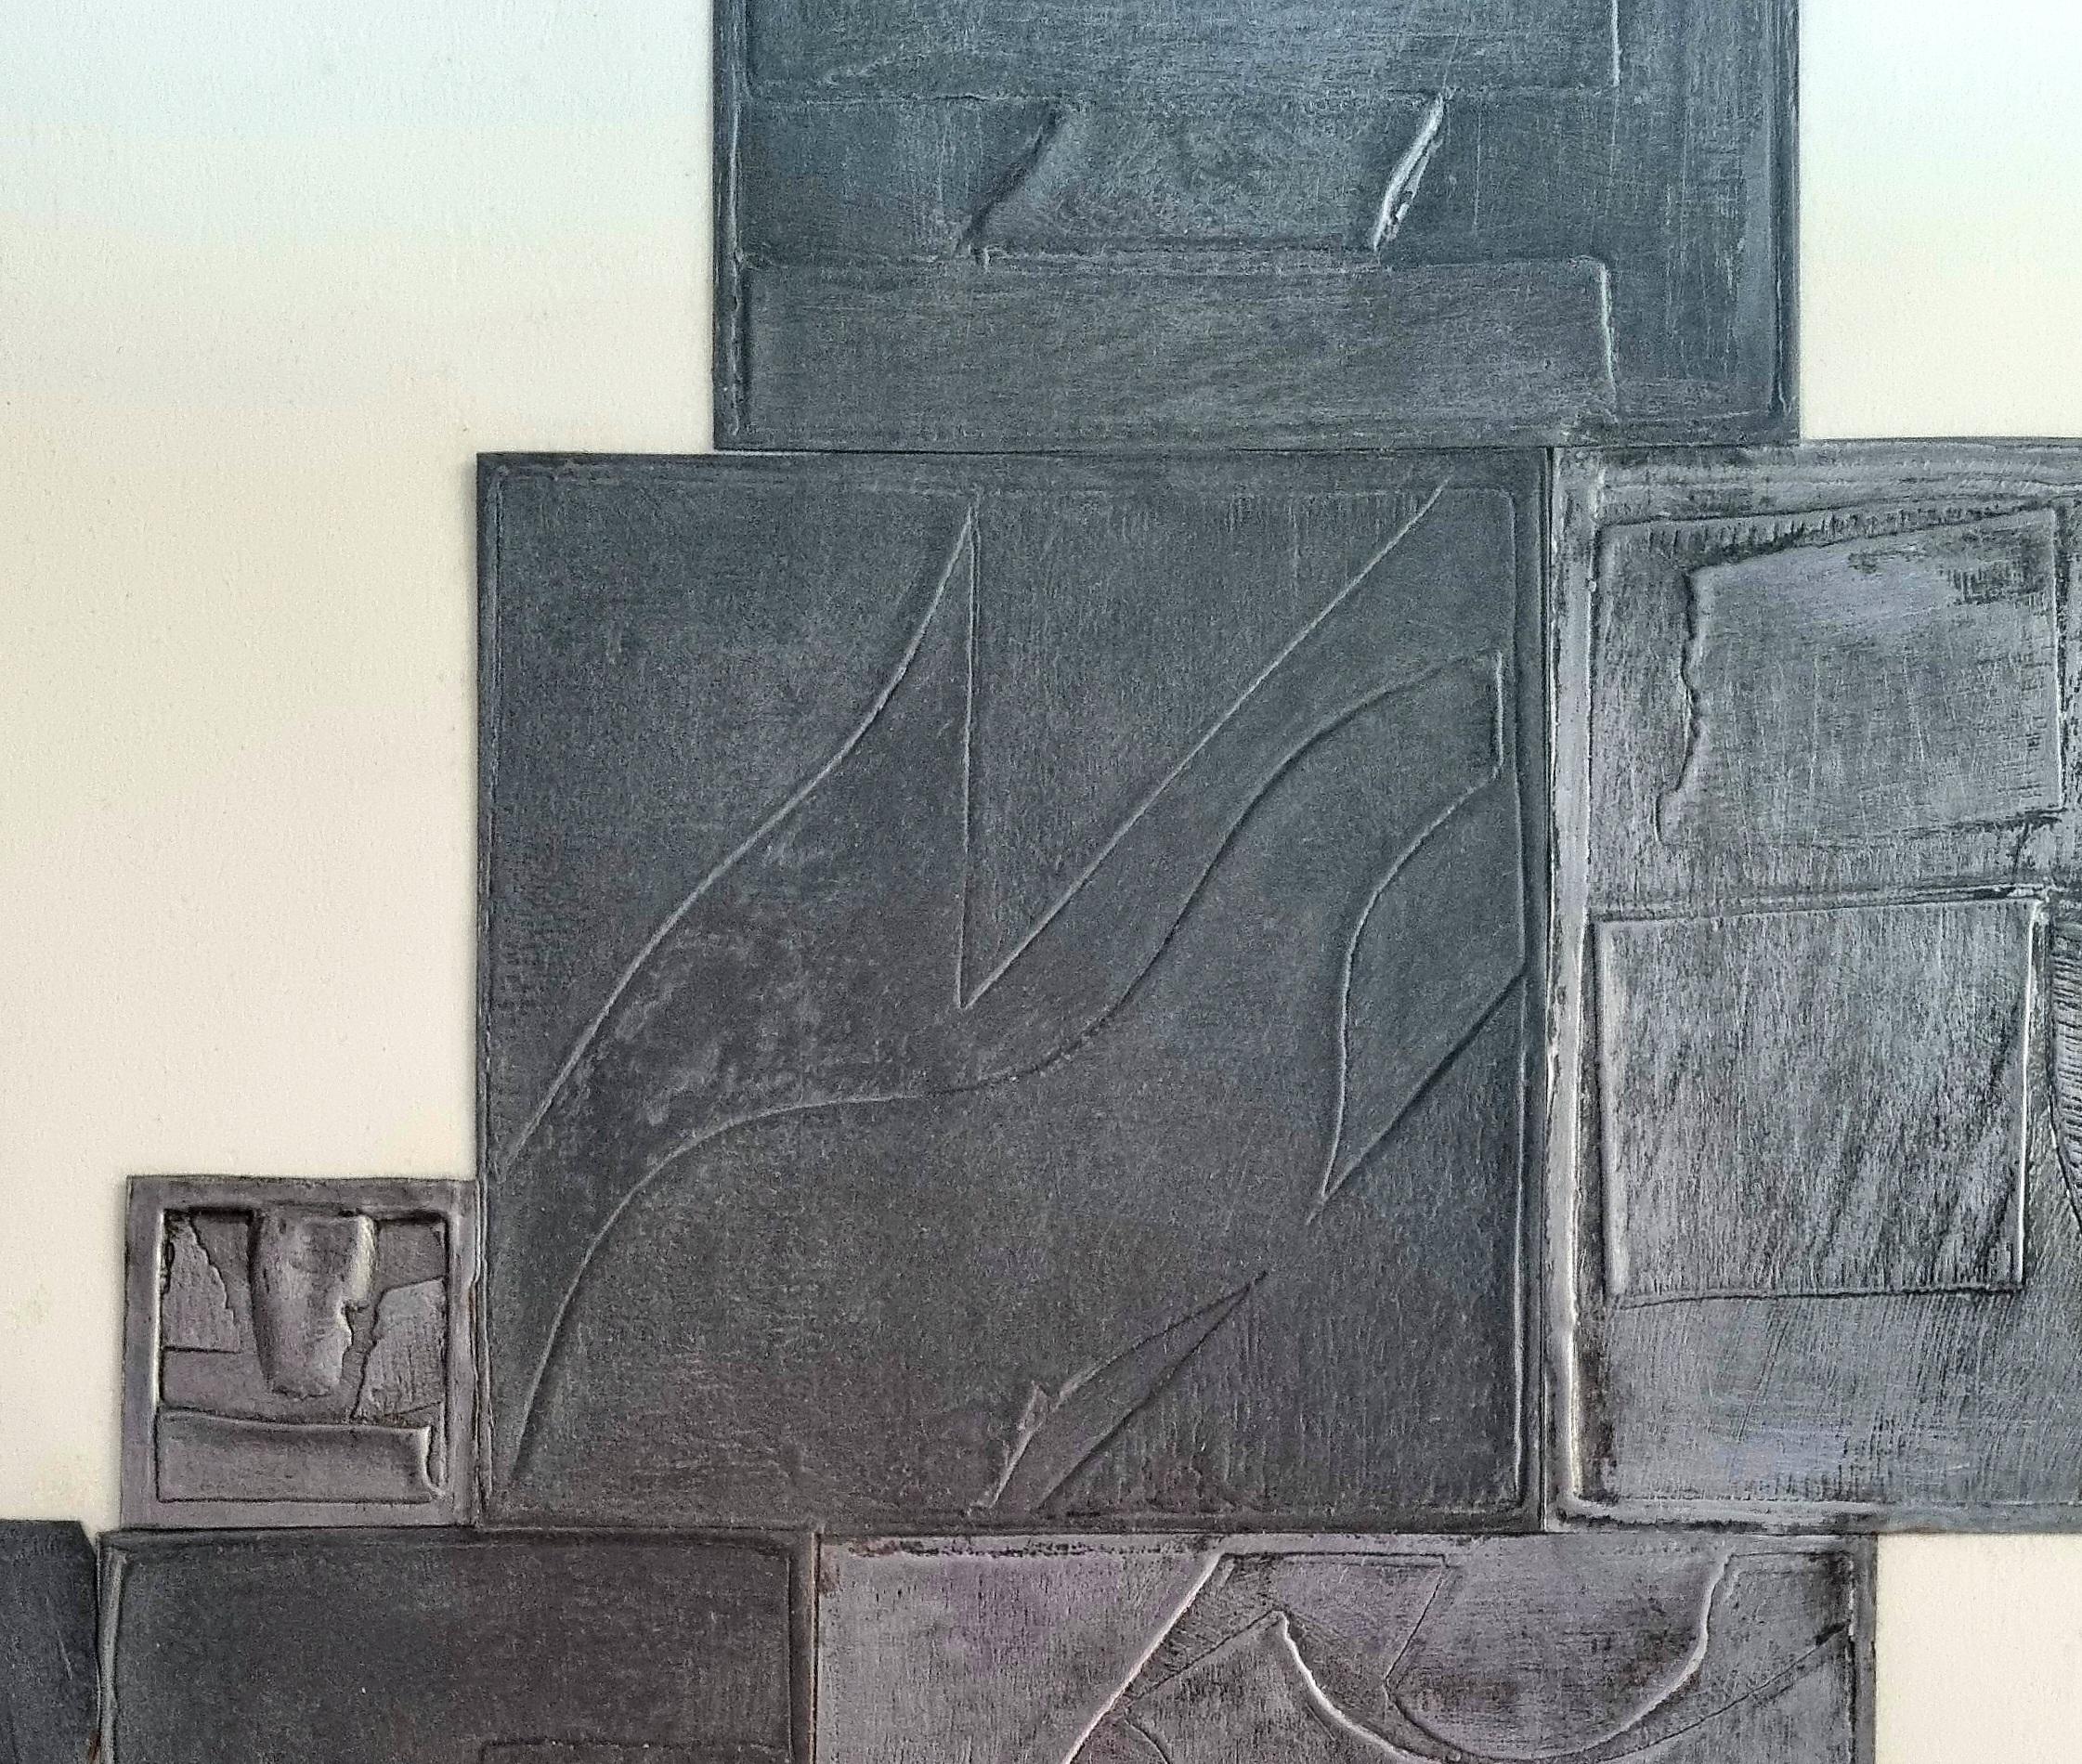 LOUISE NEVELSON - Night Tree 1970, Lead Intaglio Series.

Louise nevelson
